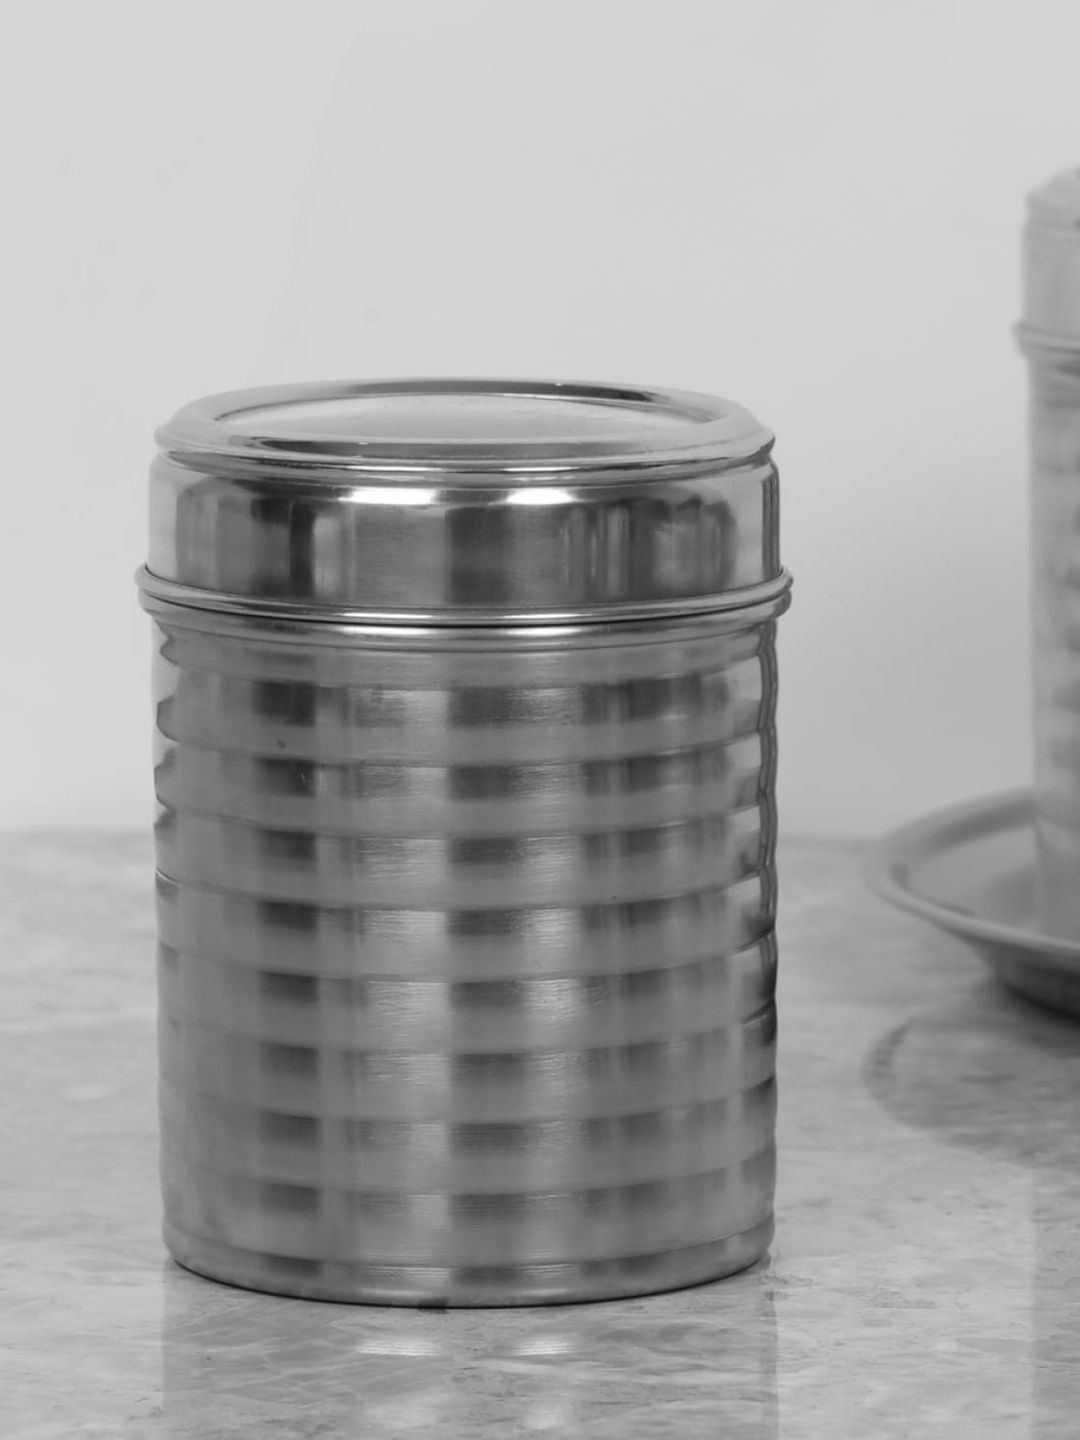 Home Centre Silver-Toned Striped Stainless Steel Canister with Matt Finish Price in India